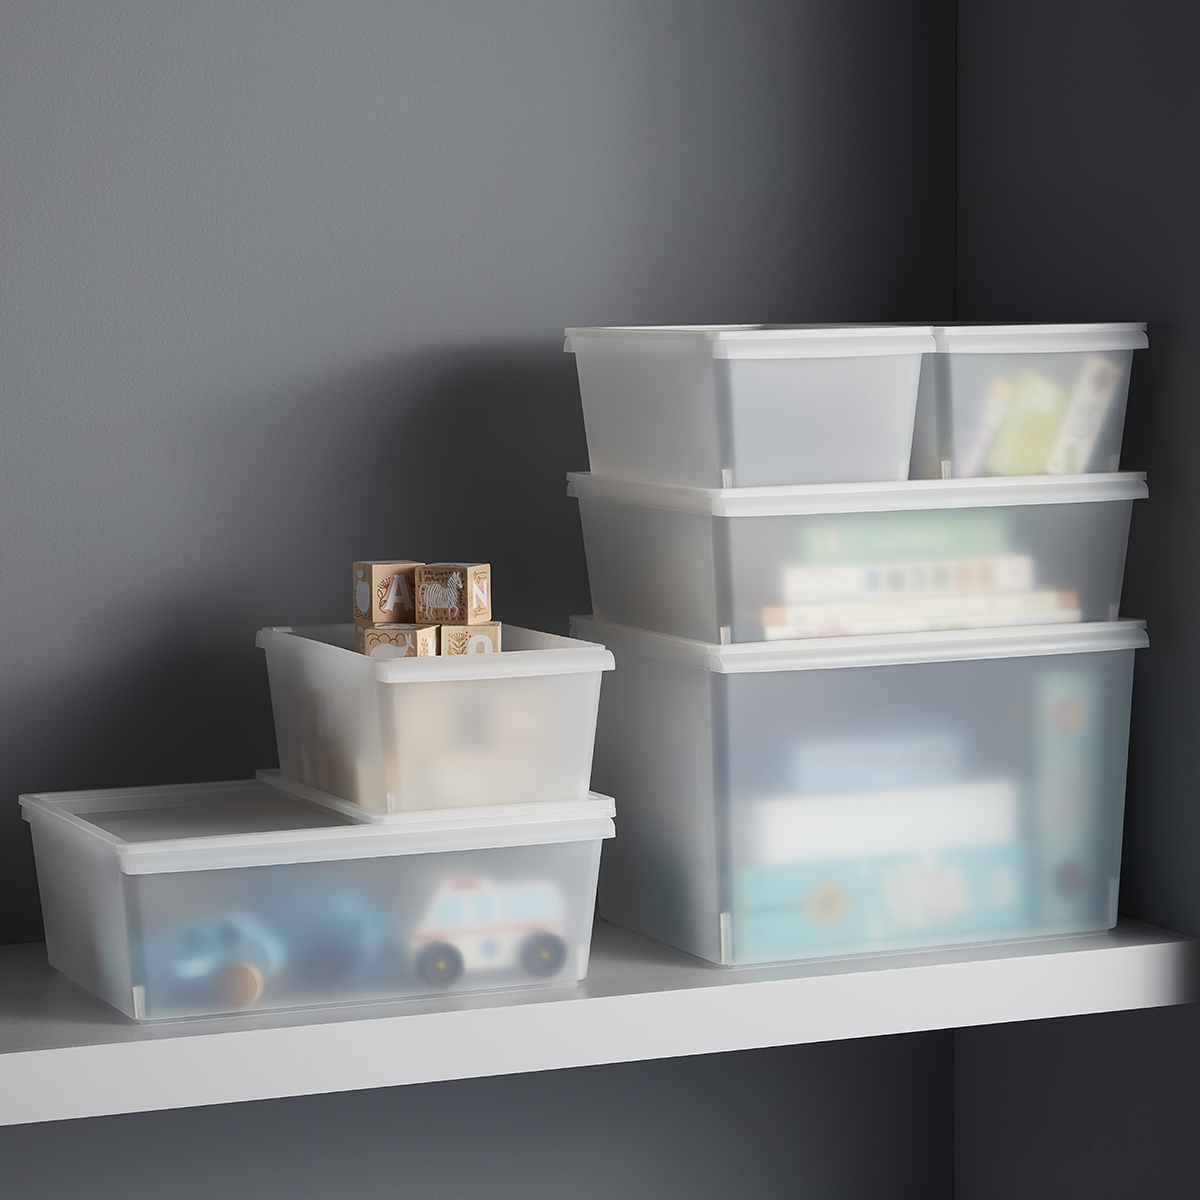 https://www.containerstore.com/catalogimages/381987/Storage-Modern-Bins-Clear-Collection.jpg